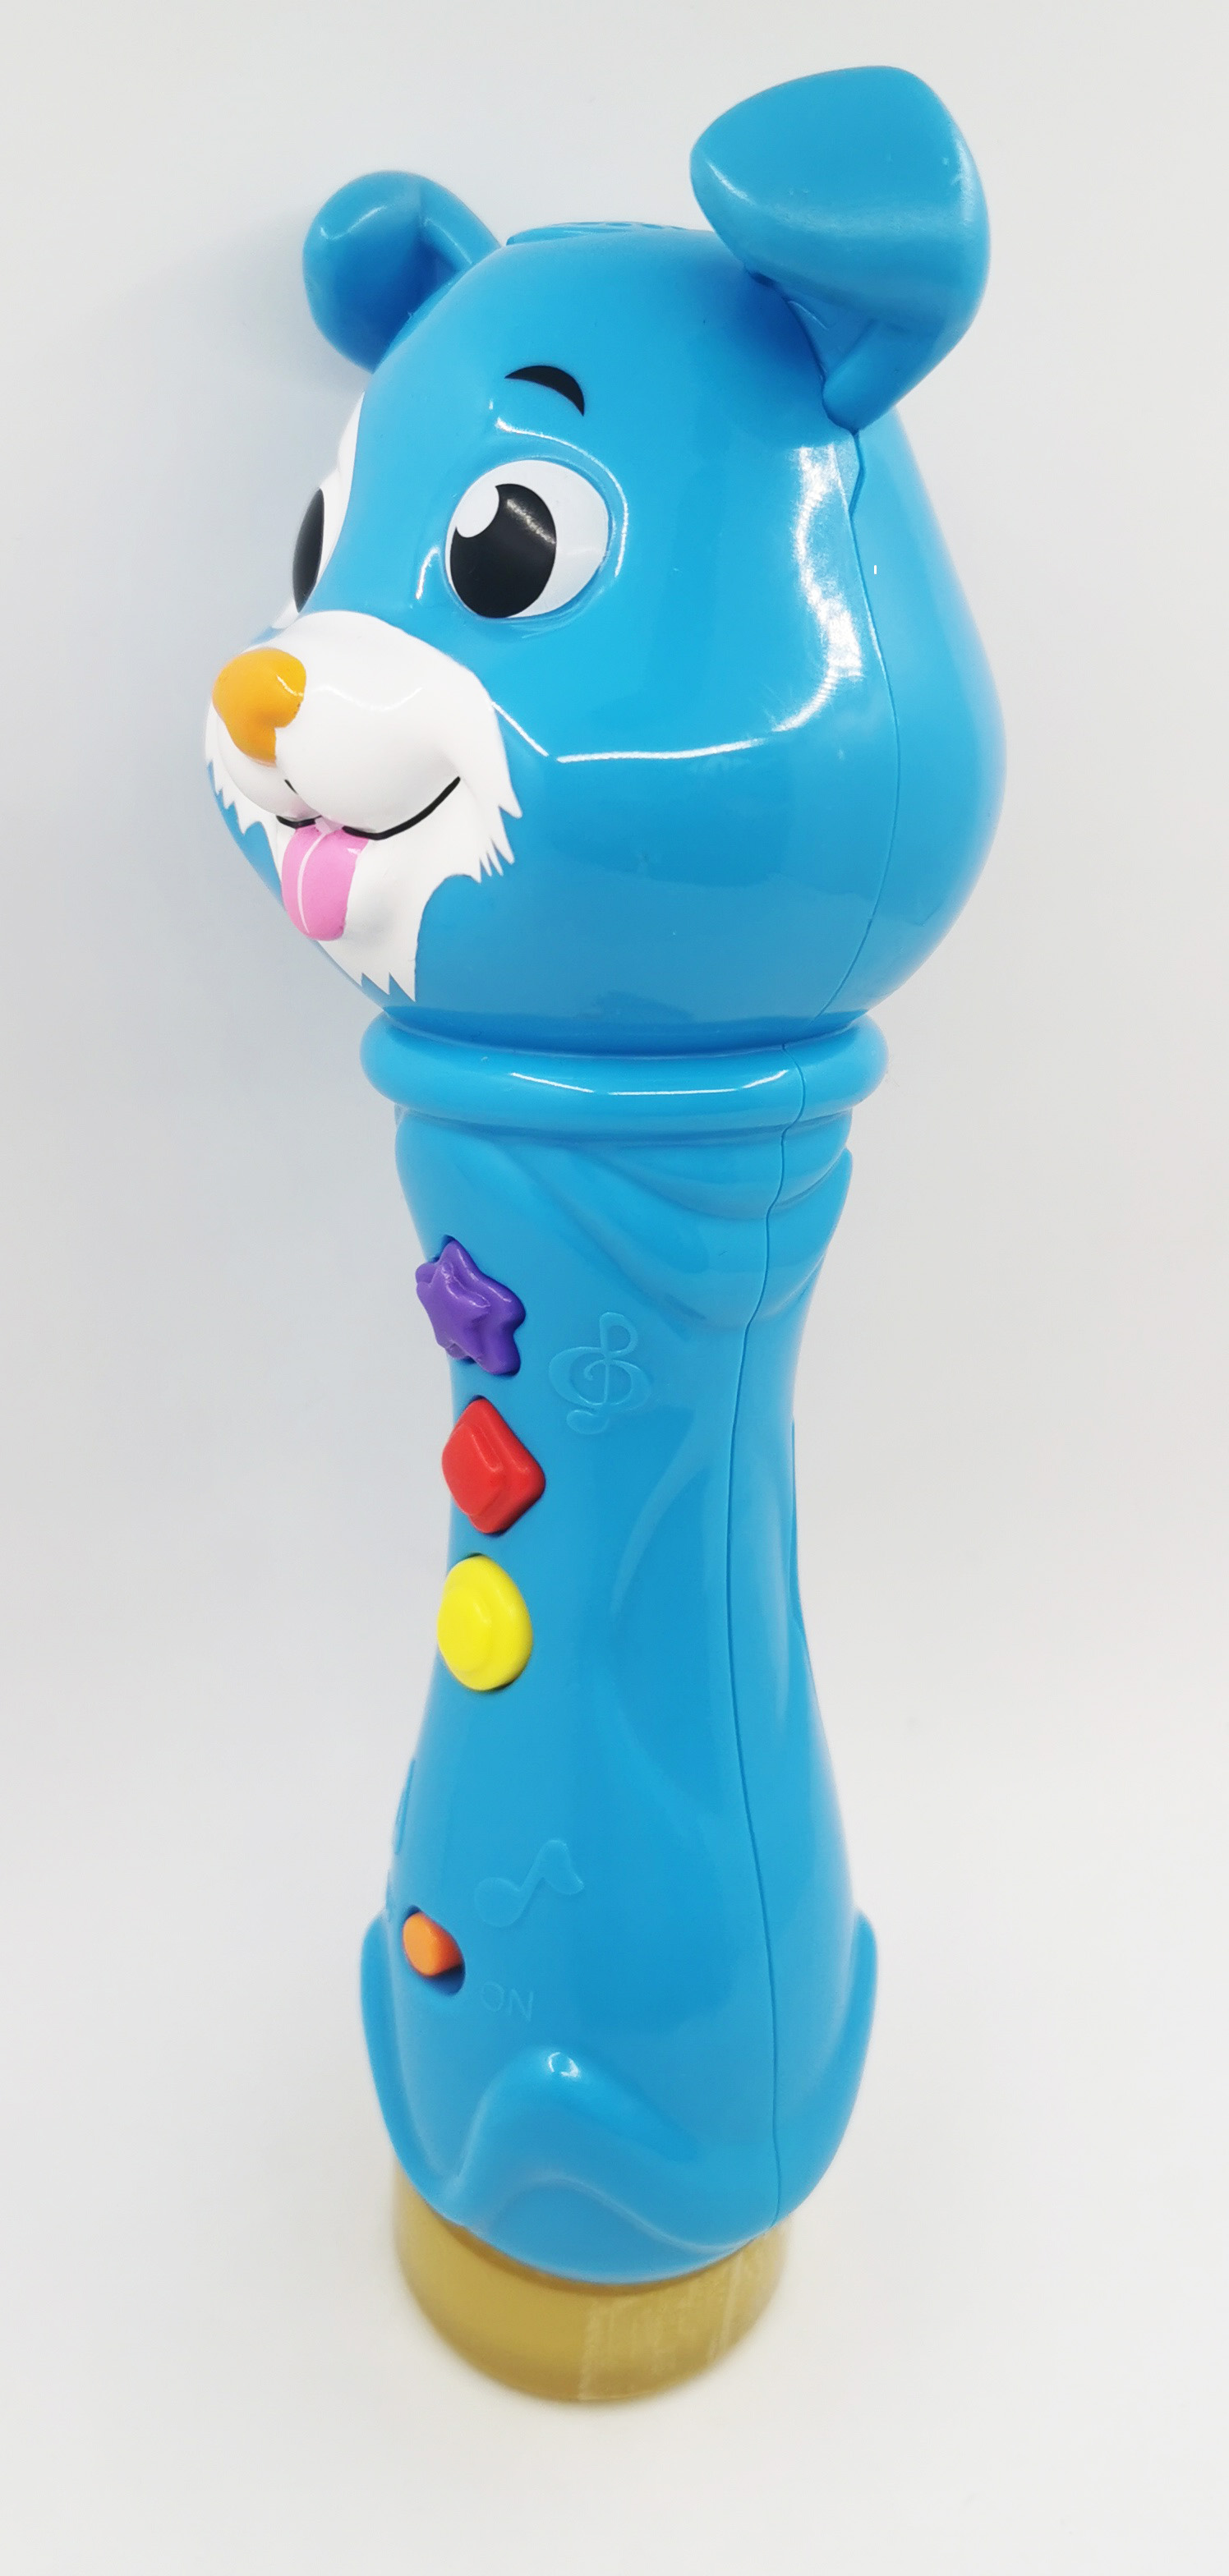 Spark Create Imagine Sing Along Dog Microphone for Kids, Cognitive Development, Ages 3 and Up, Blue - image 4 of 6